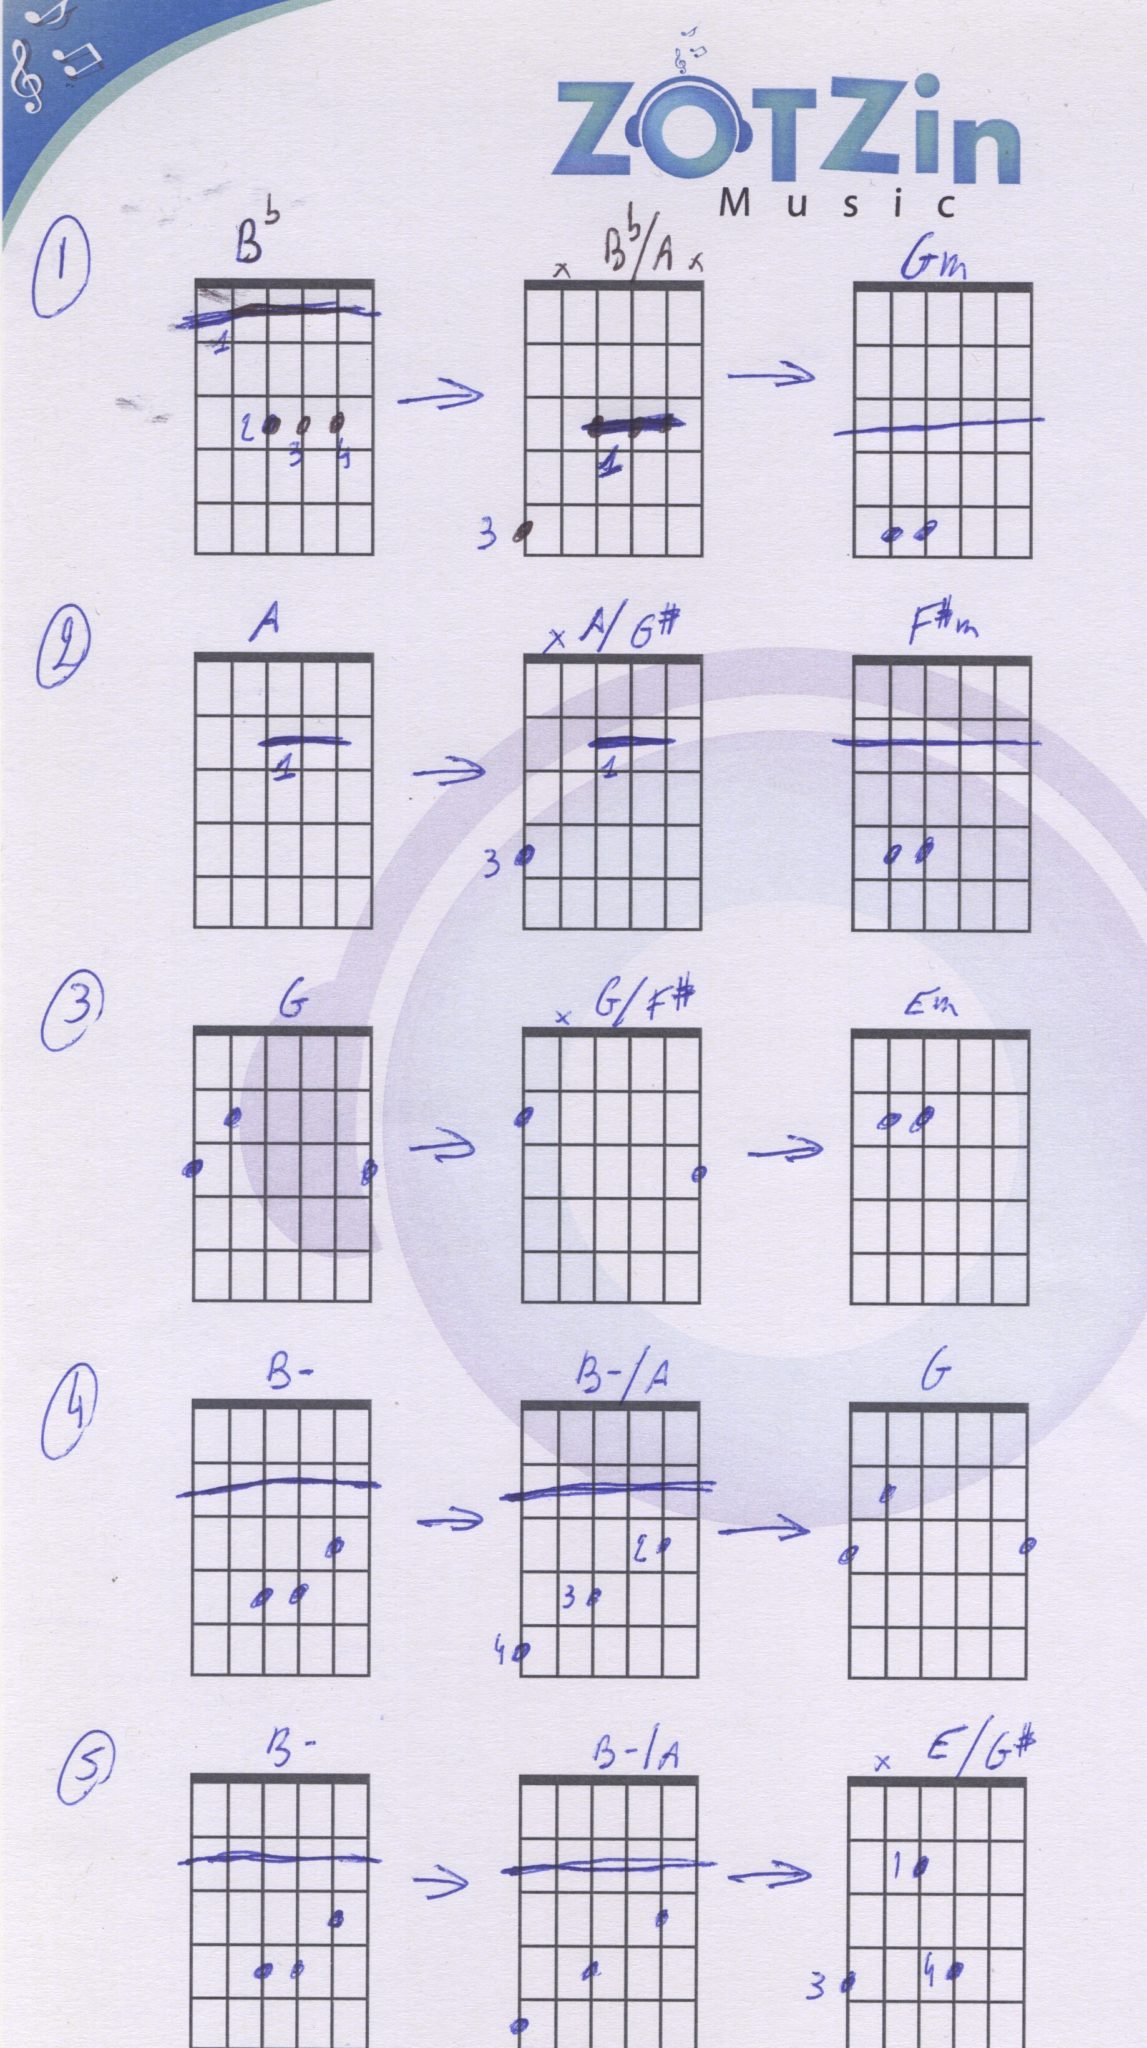 Guitar And Songwriting Lesson Hybrid Chords As Passing Chords In Rock Music Los Angeles Or Skype Guitar Lessons With Vreny Zot Zin Guitar Lessons